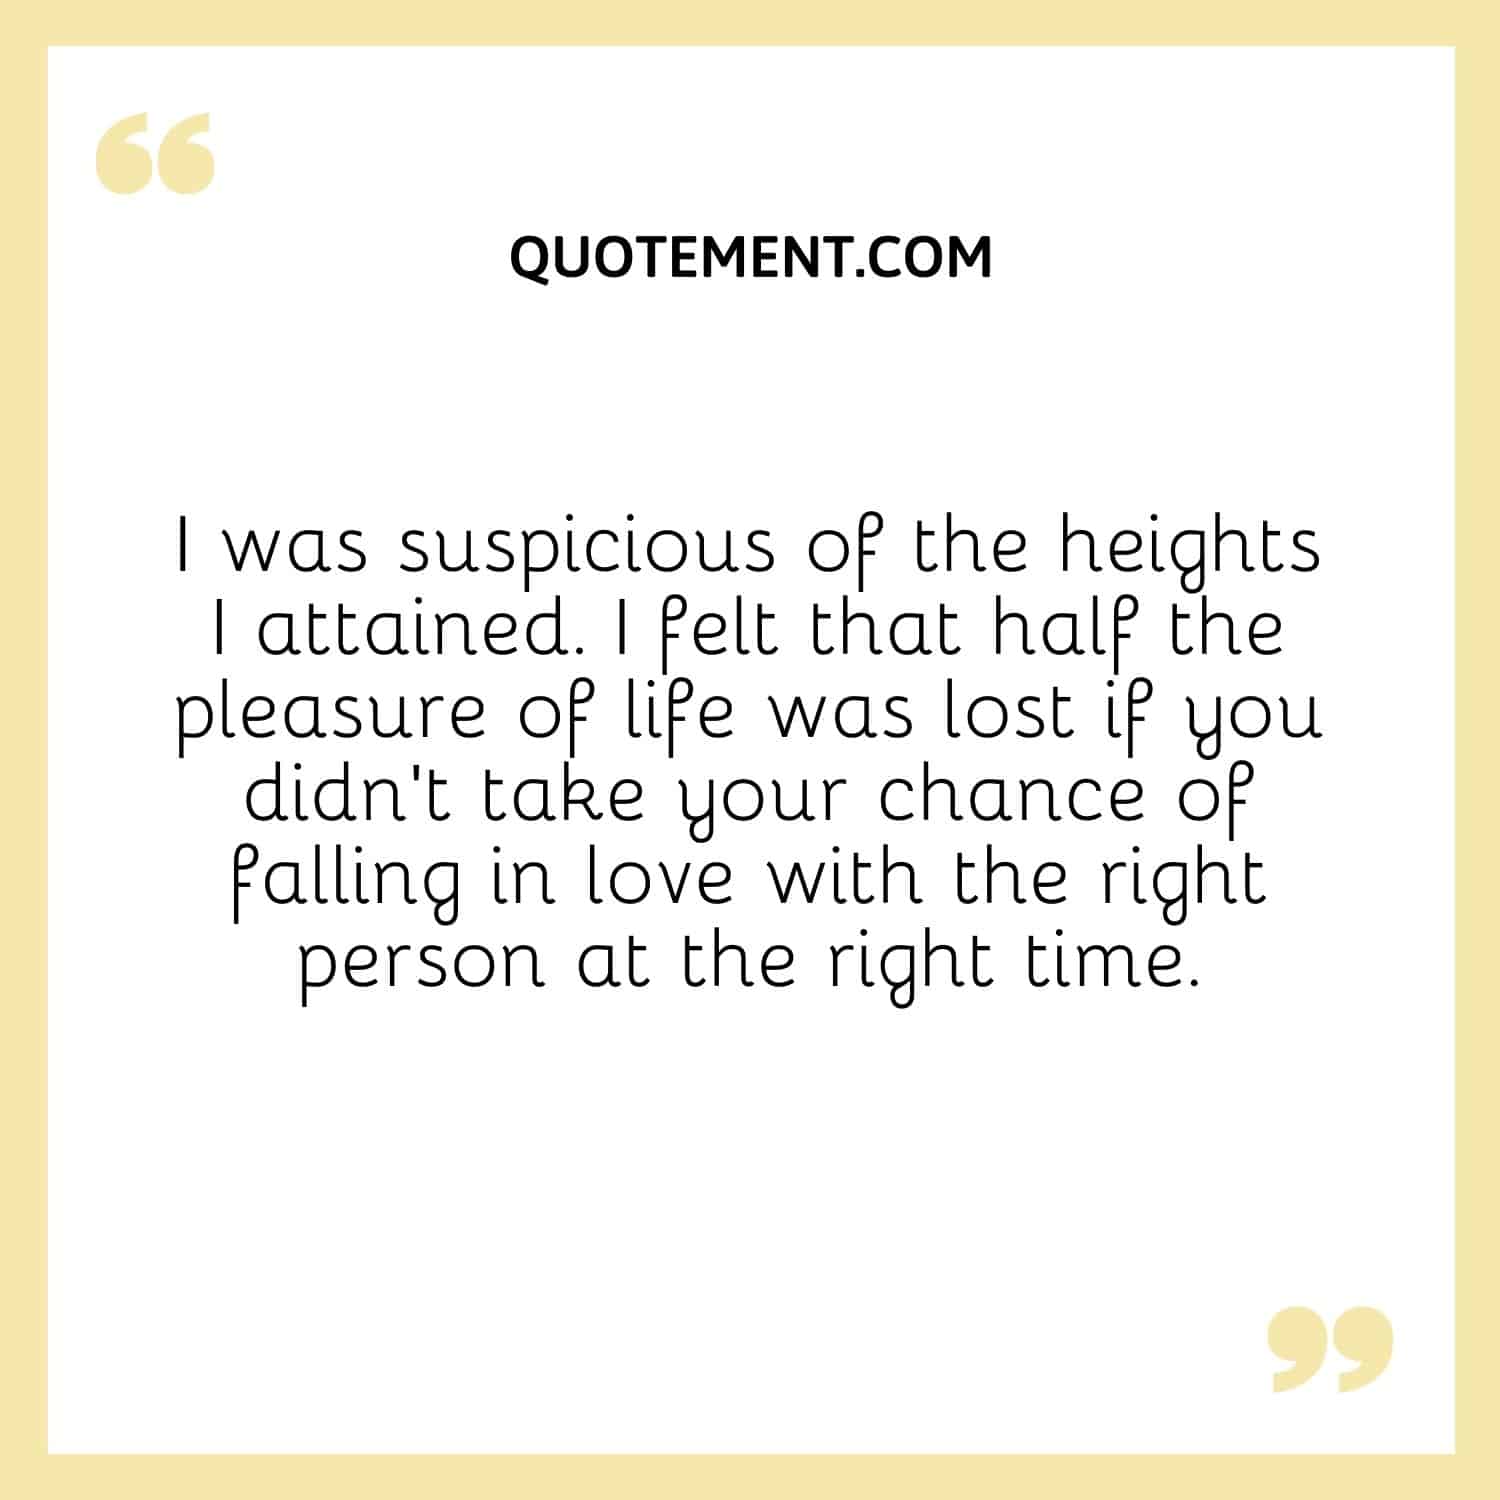 I was suspicious of the heights I attained. I felt that half the pleasure of life was lost if you didn’t take your chance of falling in love with the right person at the right time.